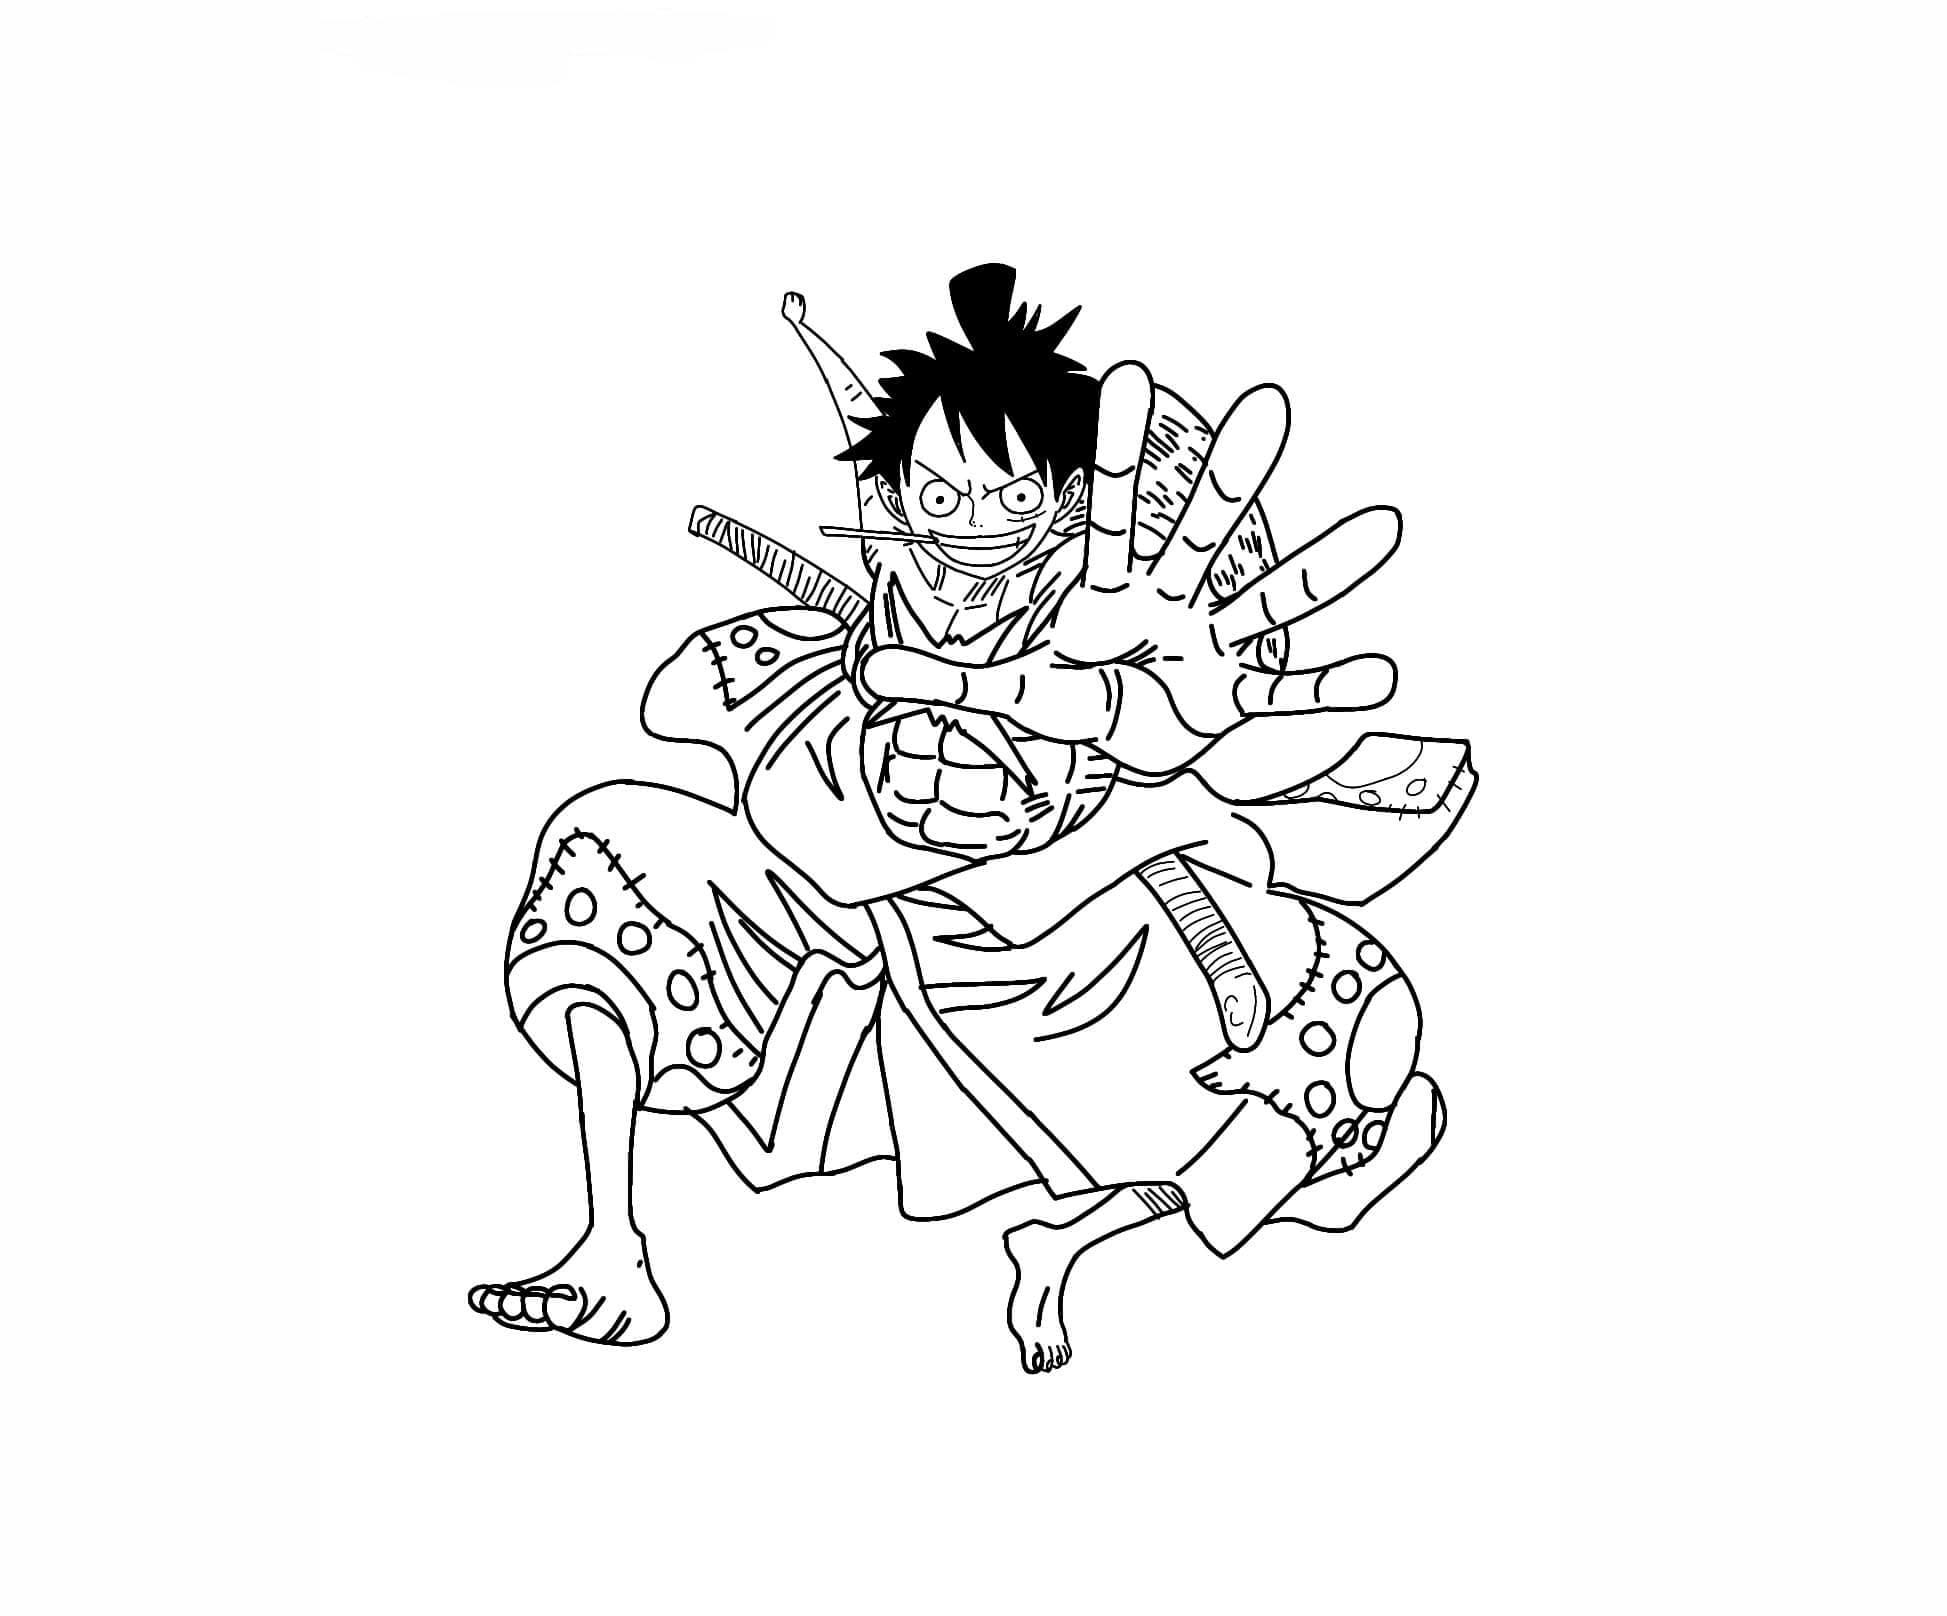 Monkey D Luffy coloring page - Download, Print or Color Online for Free